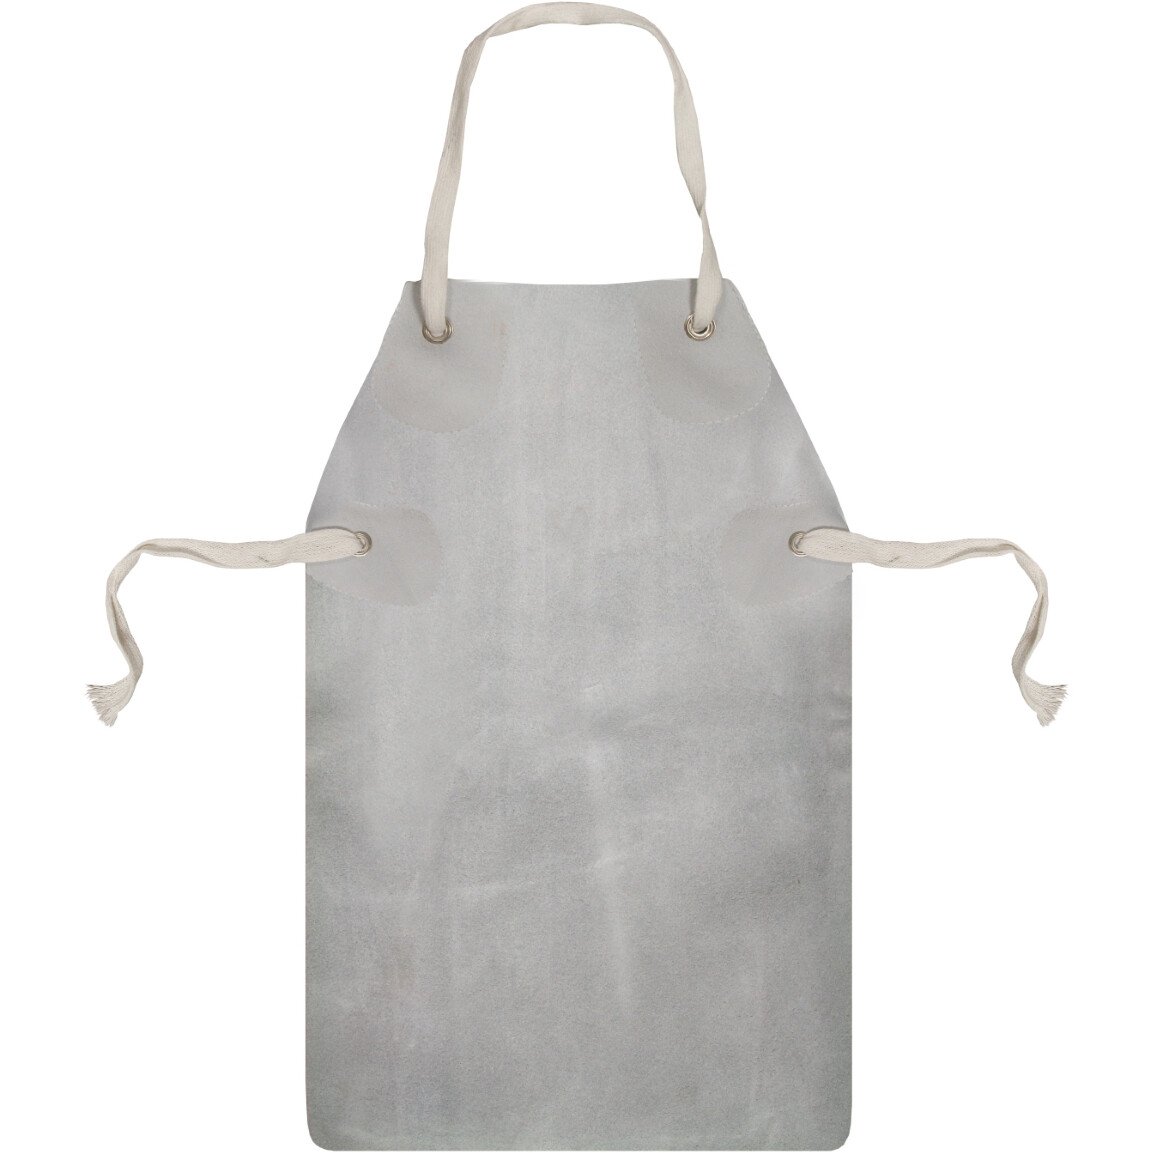 Lawson-HIS 1820 Chrome Leather Welders Welding Apron 24" x 36" With Ties